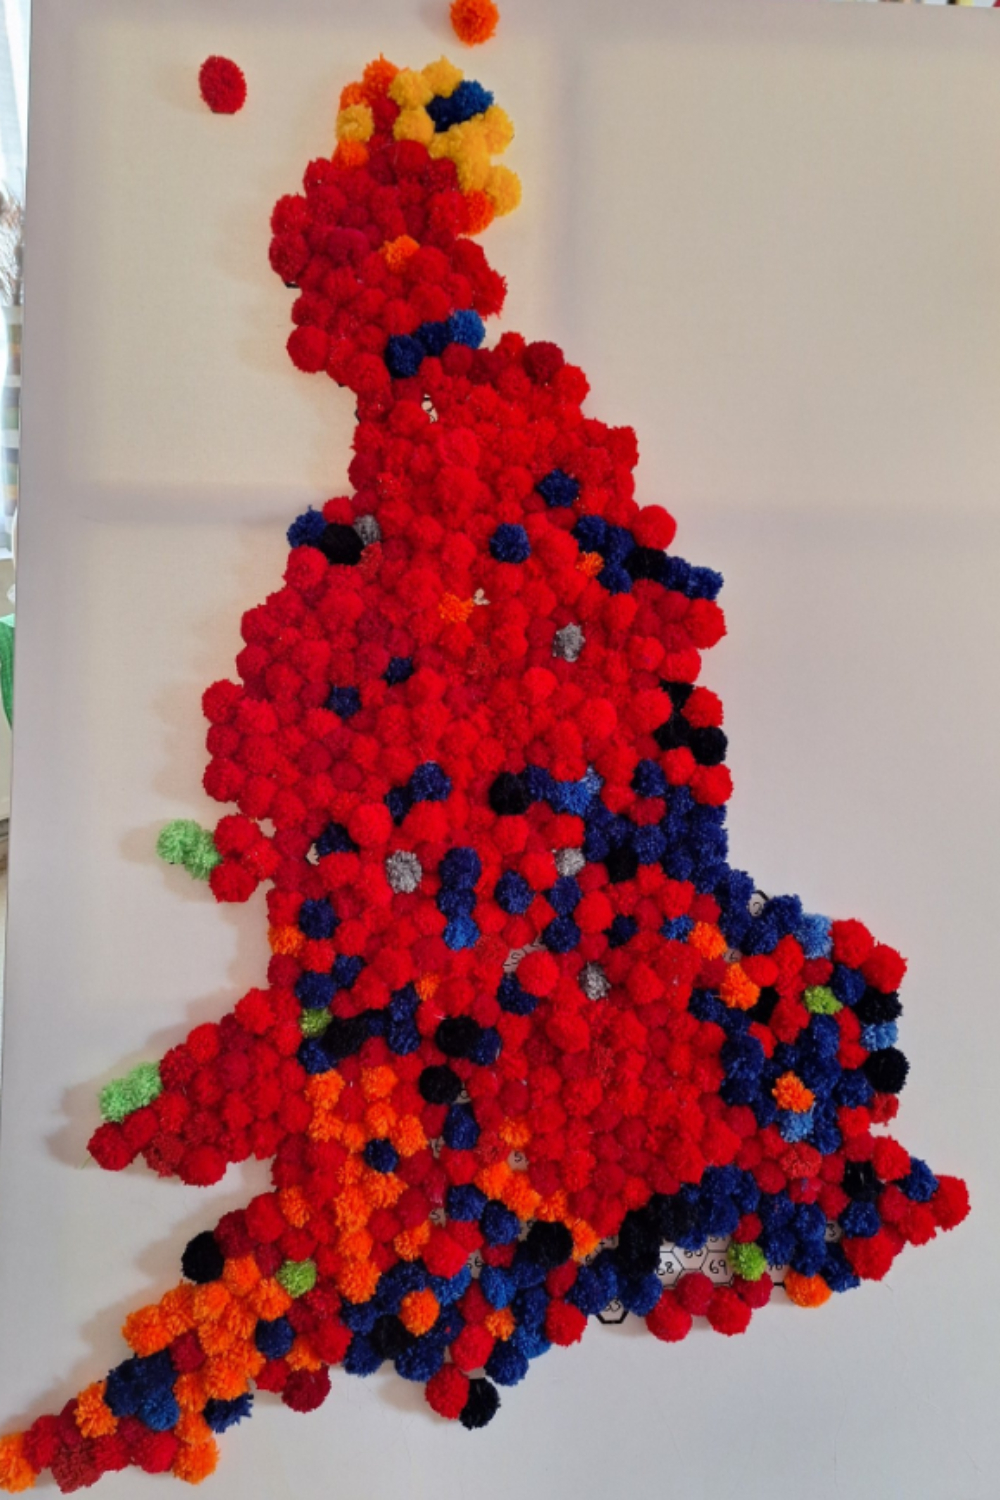 An election map covered in pom poms